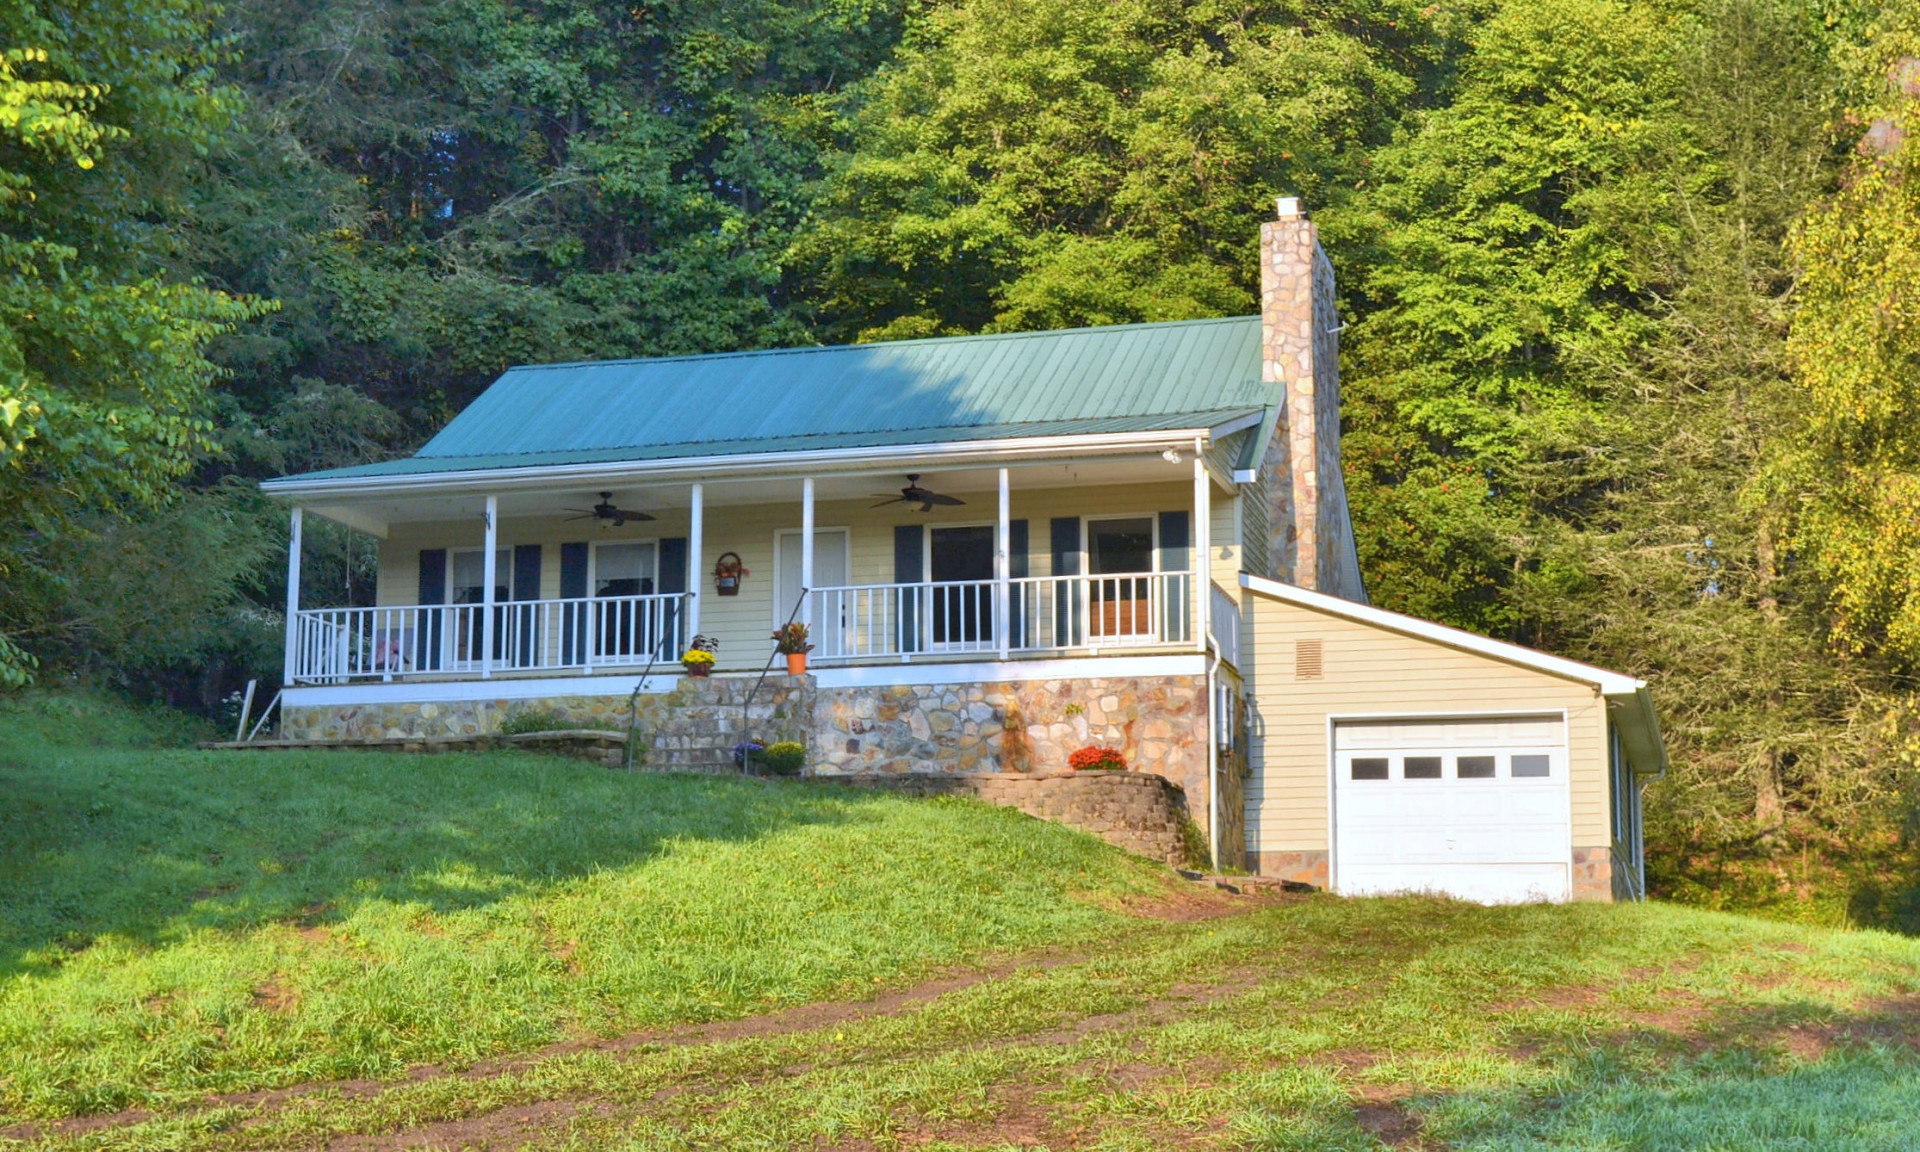 Enjoy the mountain views and the sights and sounds of Little Wilson Creek as well as a small waterfall from the covered front porch of this charming cottage